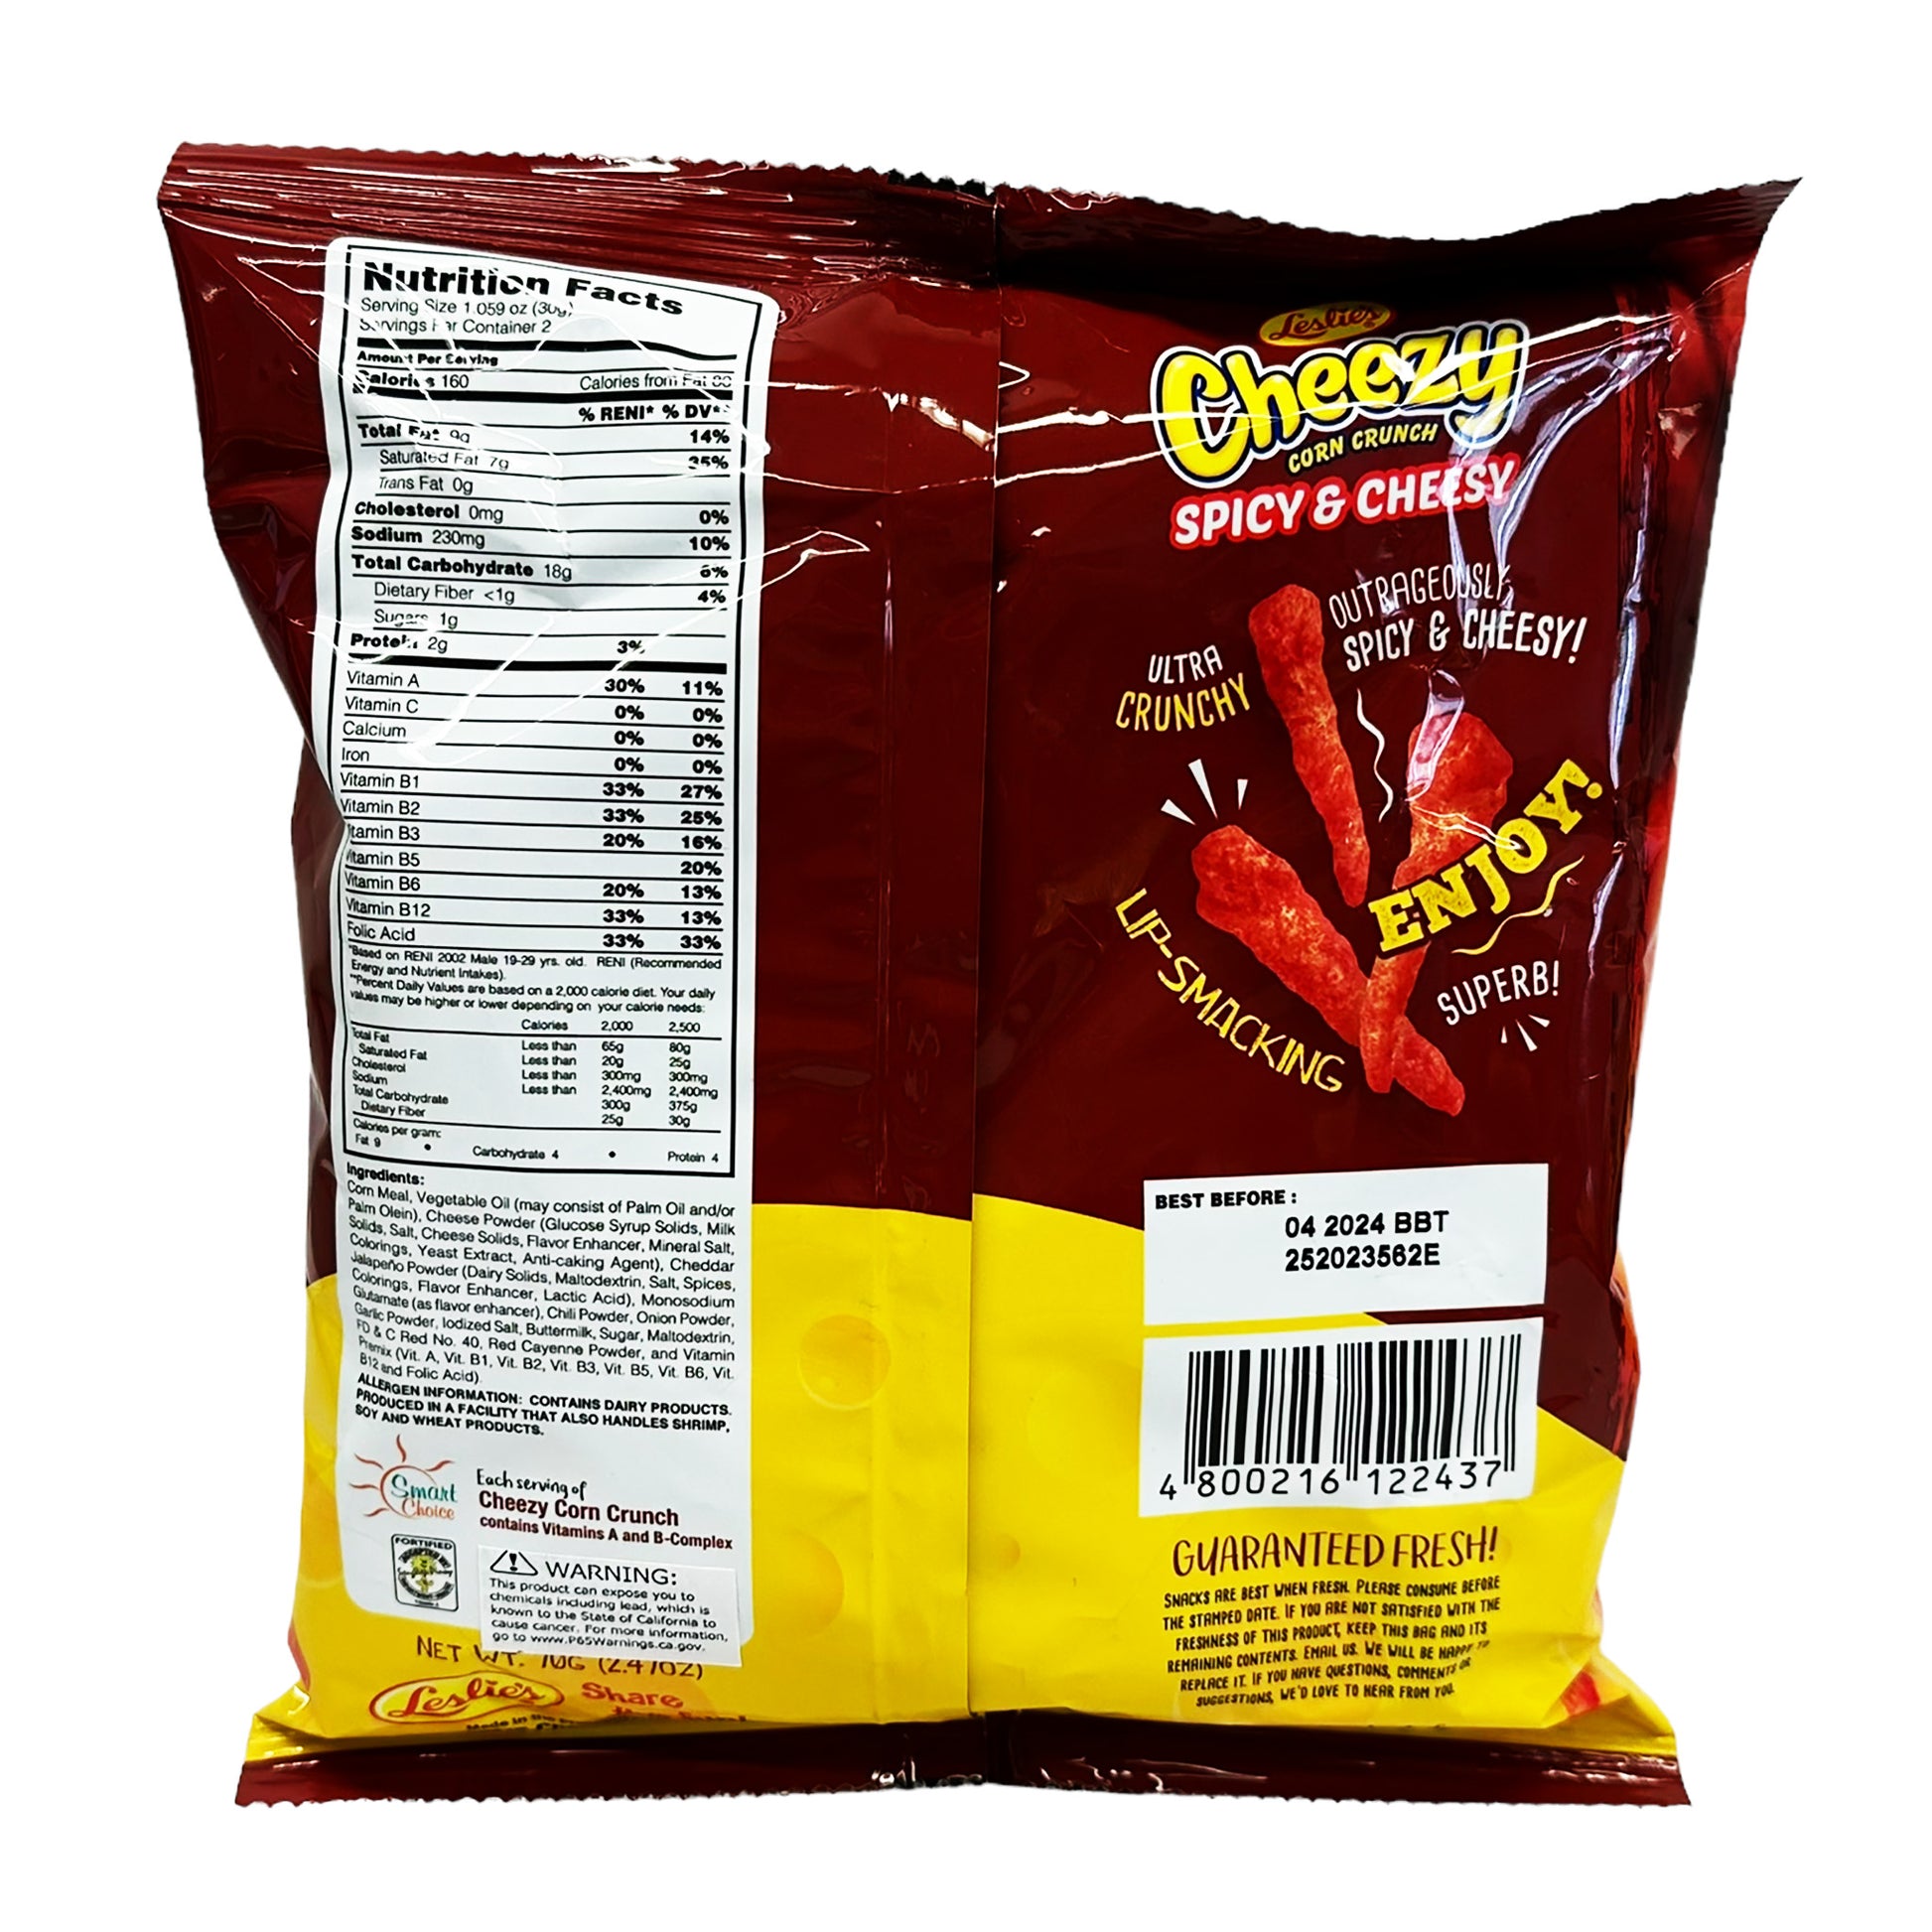 Back graphic image of Leslie's Cheezy Corn Crunch - Spicy & Cheezy 2.47oz (70g)